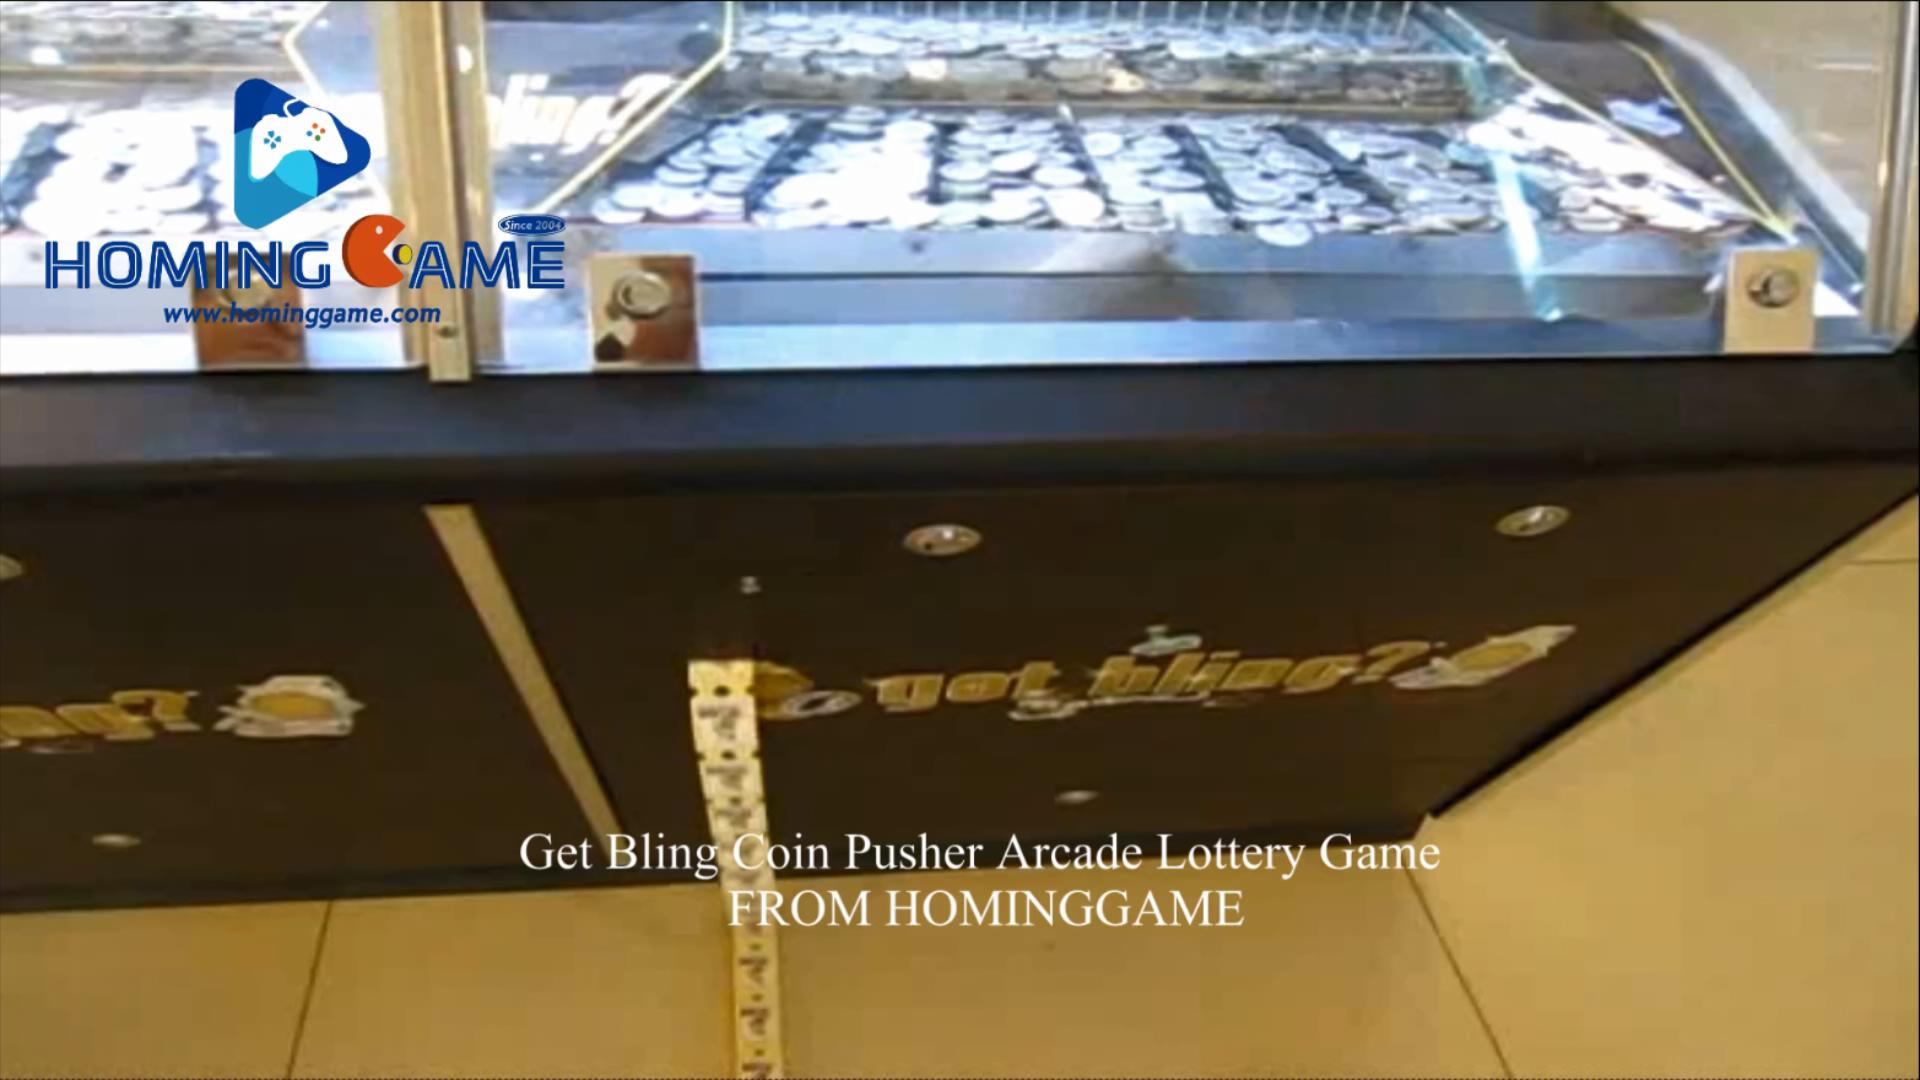 get bling coin pusher game machine,get bling coin pusher arcade game machine,get bling coin pusher arcade game machine for sale,get bling coin pusher arcade lottery game machine,coin pusher,coin pusher game,coin pusher arcade game machine,token pusher game machine,penny pusher arcade game machine,penny pusher game,game machine,arcade game machine,coin operated game machine,indoor game machine,electrical game machine,amusement park game equipment,game equipment,amusement machine,electrical game,slot game machine,gaming machine,gambling machine,indoor game,entertainment game,family entertainment game mchine,lottery game,redemption game machine,redemption ticket game machine,kids game machine,kids game equipment,hominggame,www.gametube.hk,coin games,coin machine,coin pusher arcade game